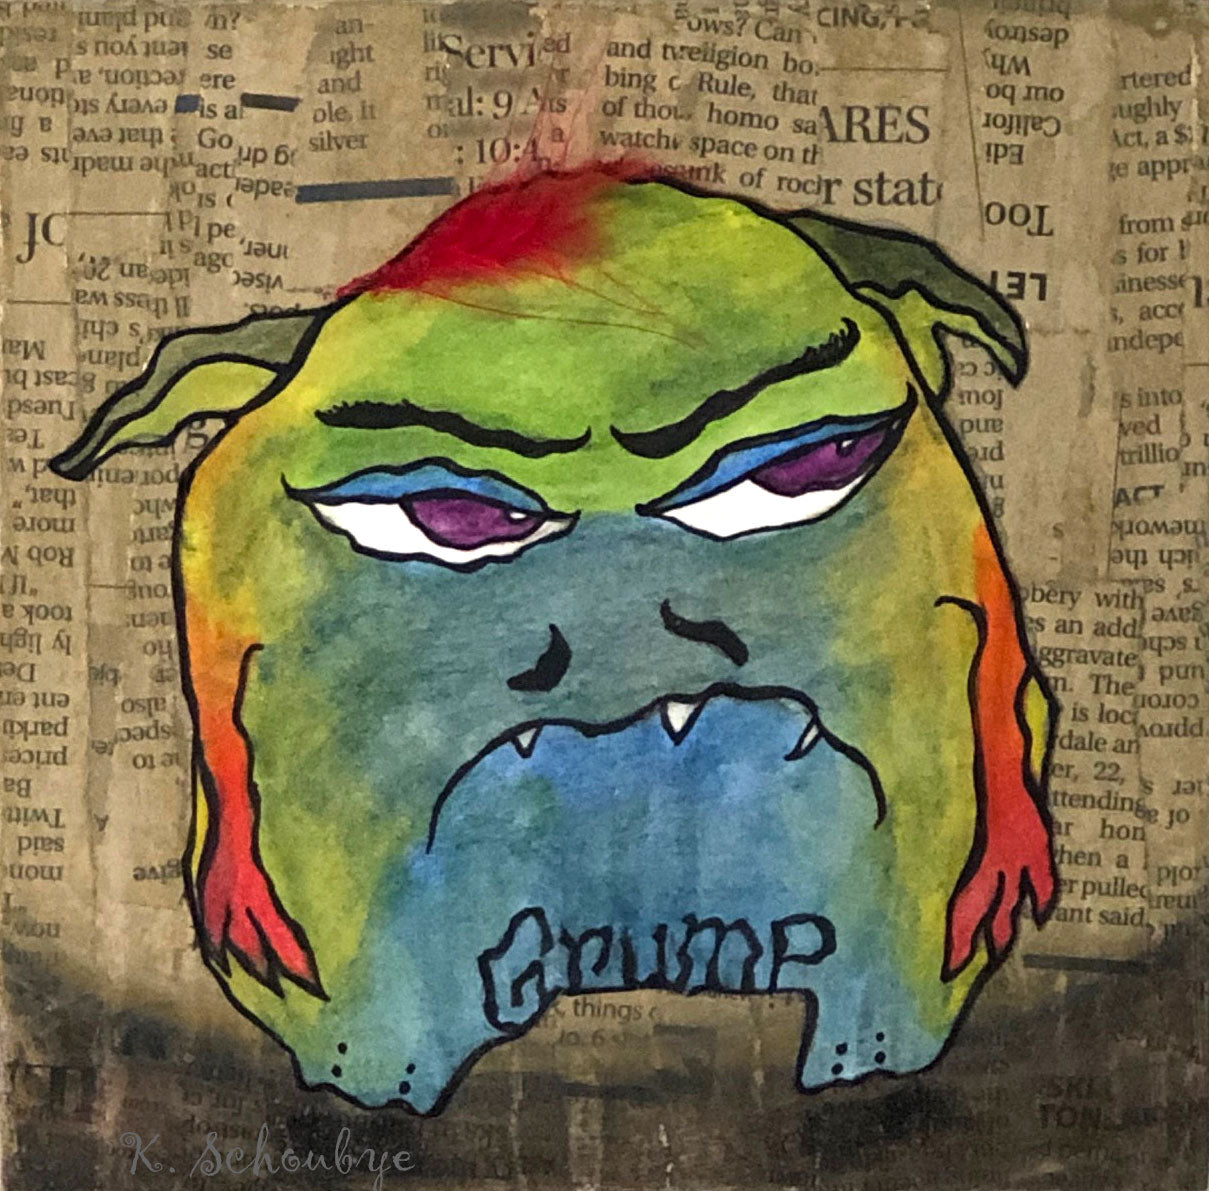 Grump Monster Art Picture red orange green blue and yellow